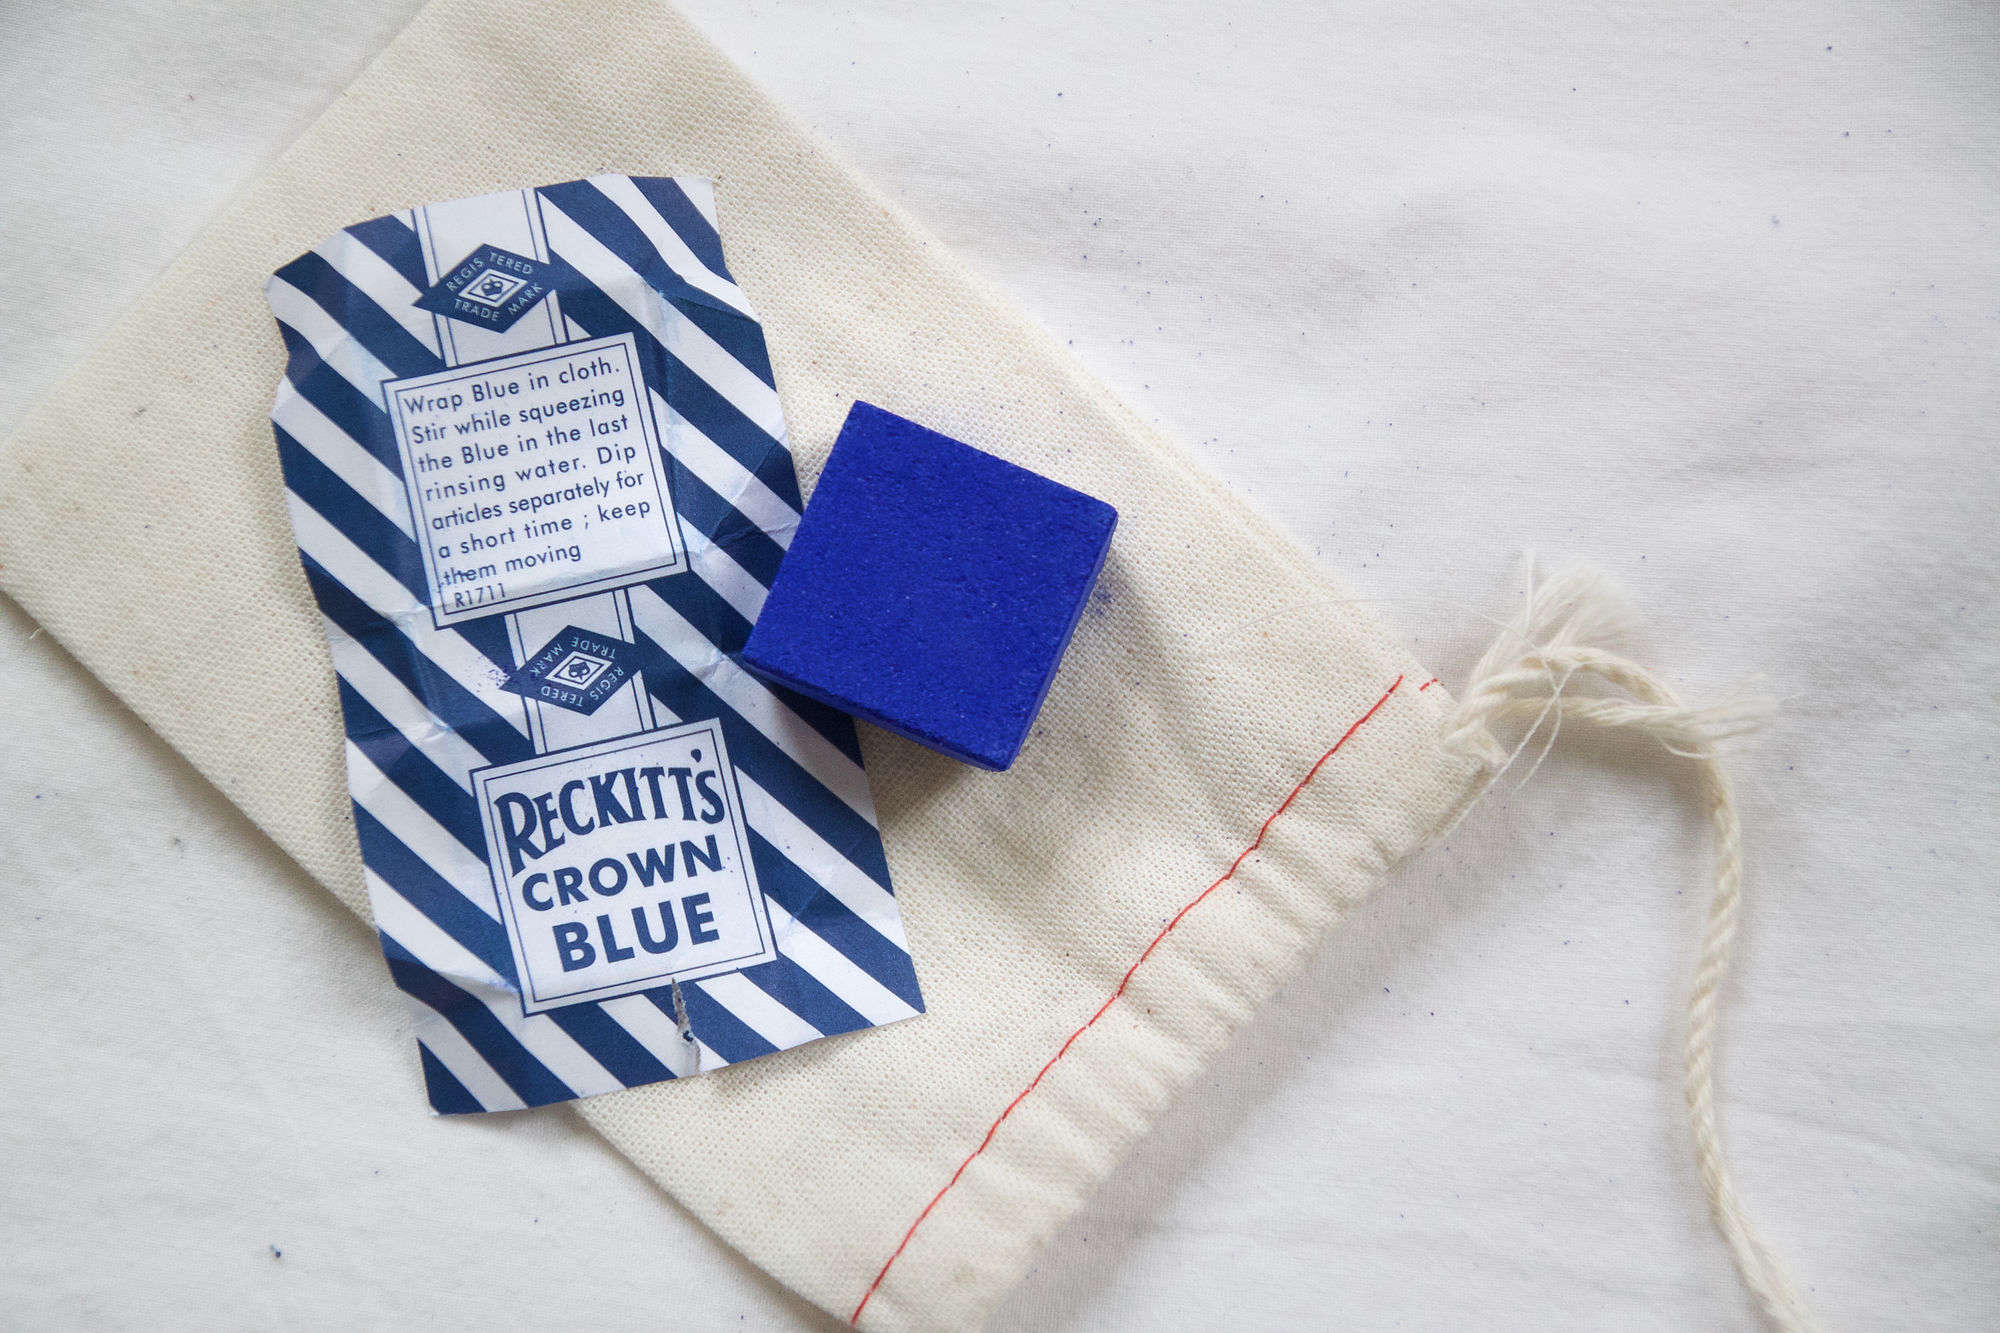 https://www.remodelista.com/wp-content/uploads/2017/04/how-to-use-bluing-powder-reckitts.jpg